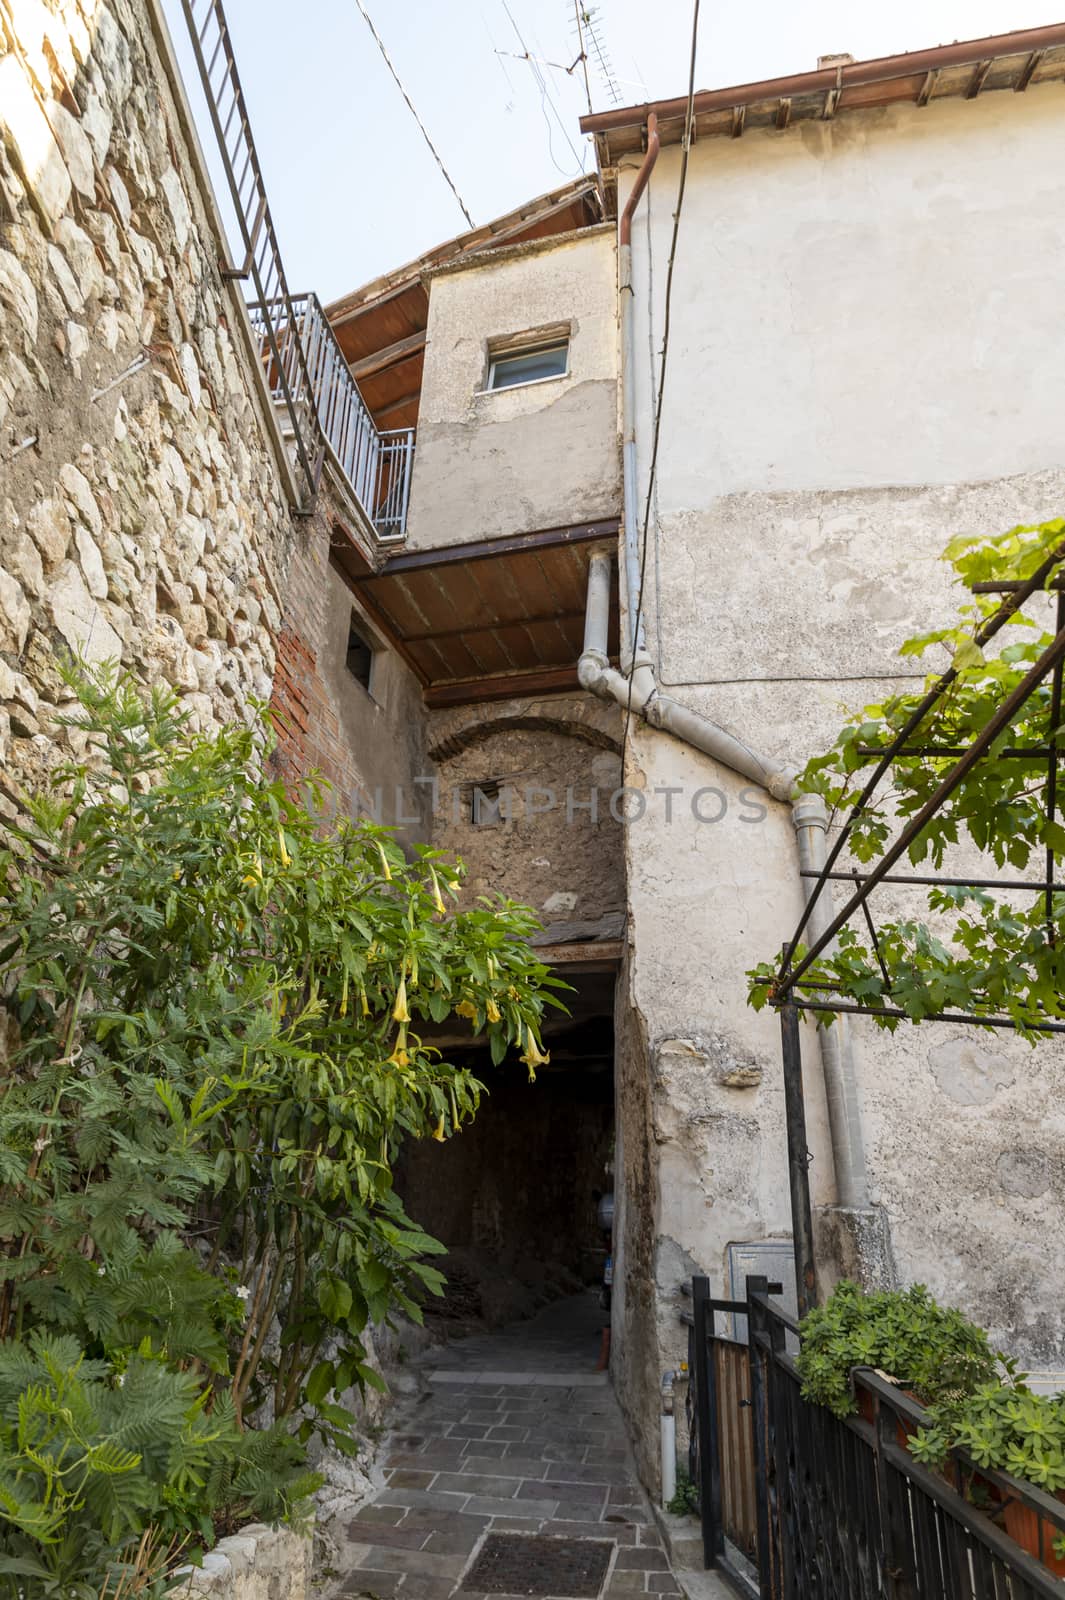 miranda,italy october 01 2020:architecture of alleys, squares and buildings in the town of Miranda in the province of Terni